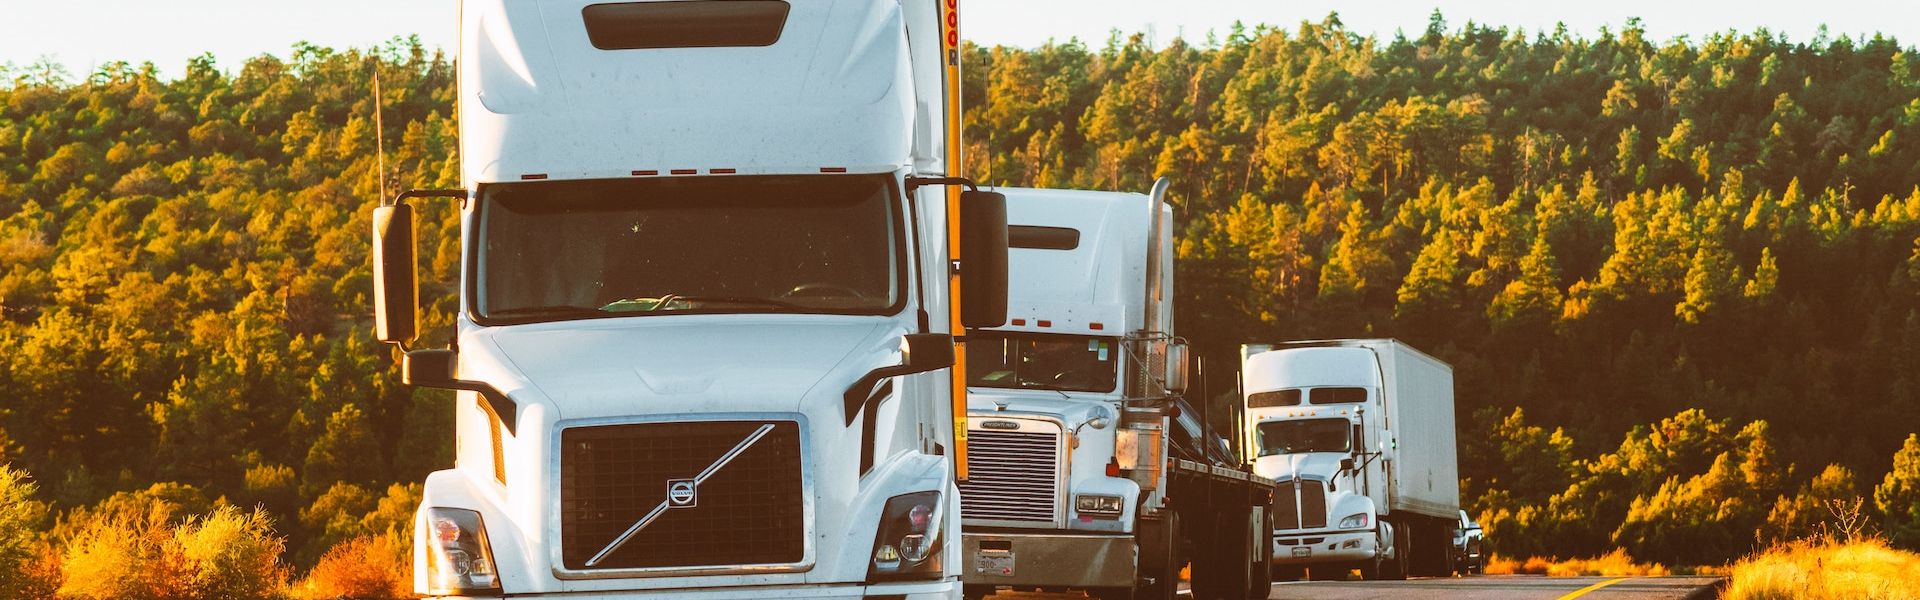 What Happens if You have a CDL and get a DUI?